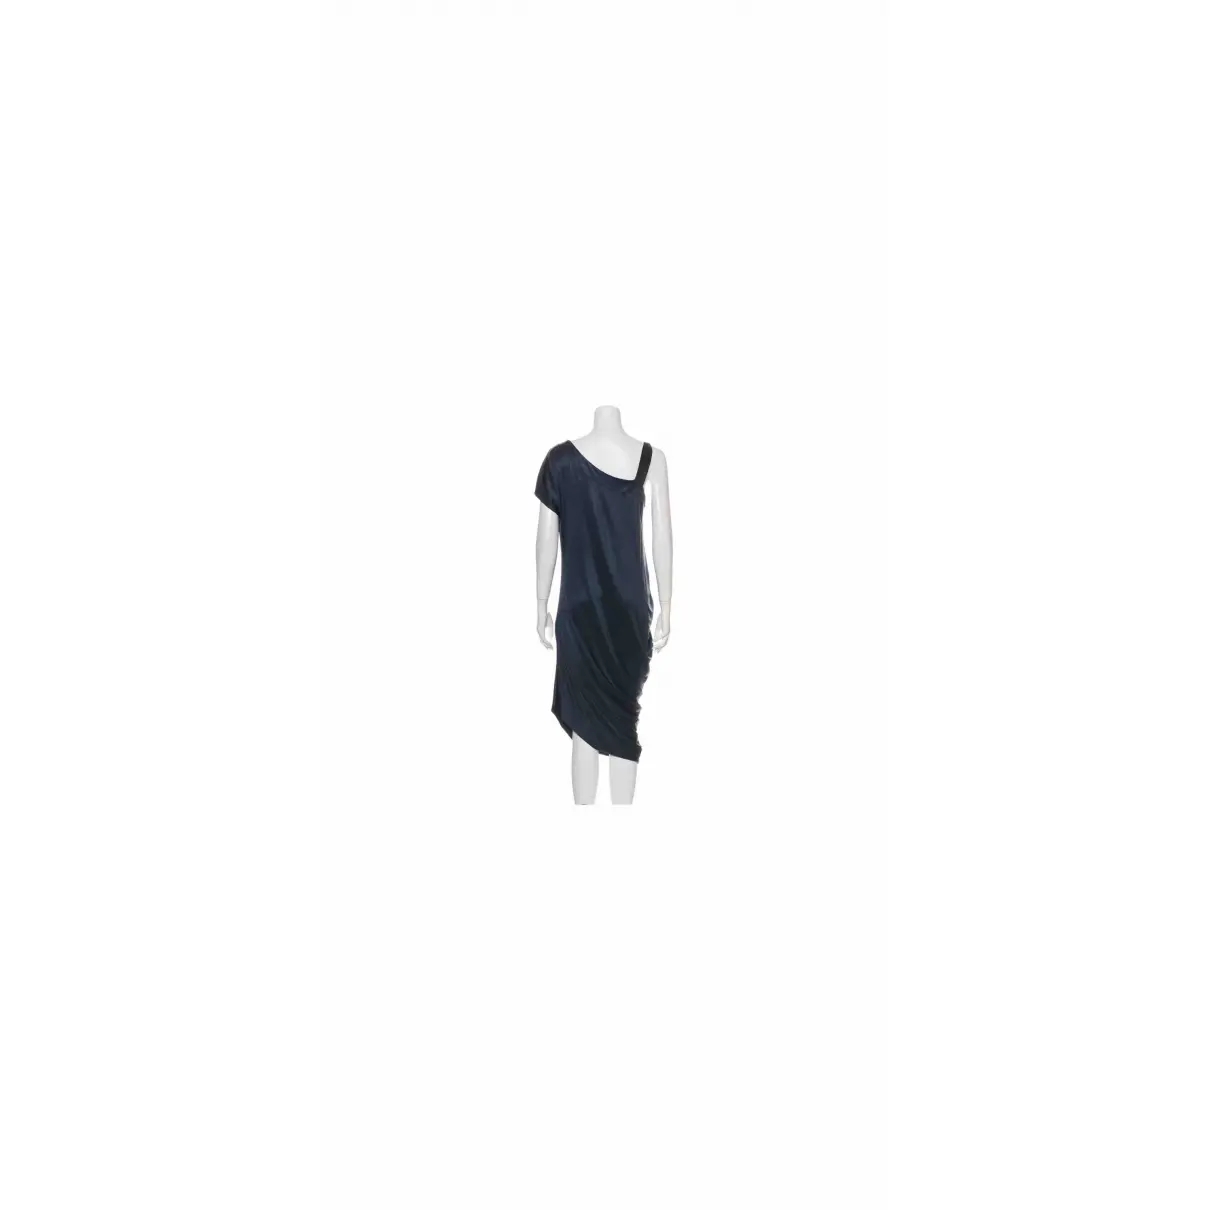 Buy Vivienne Westwood Anglomania Mid-length dress online